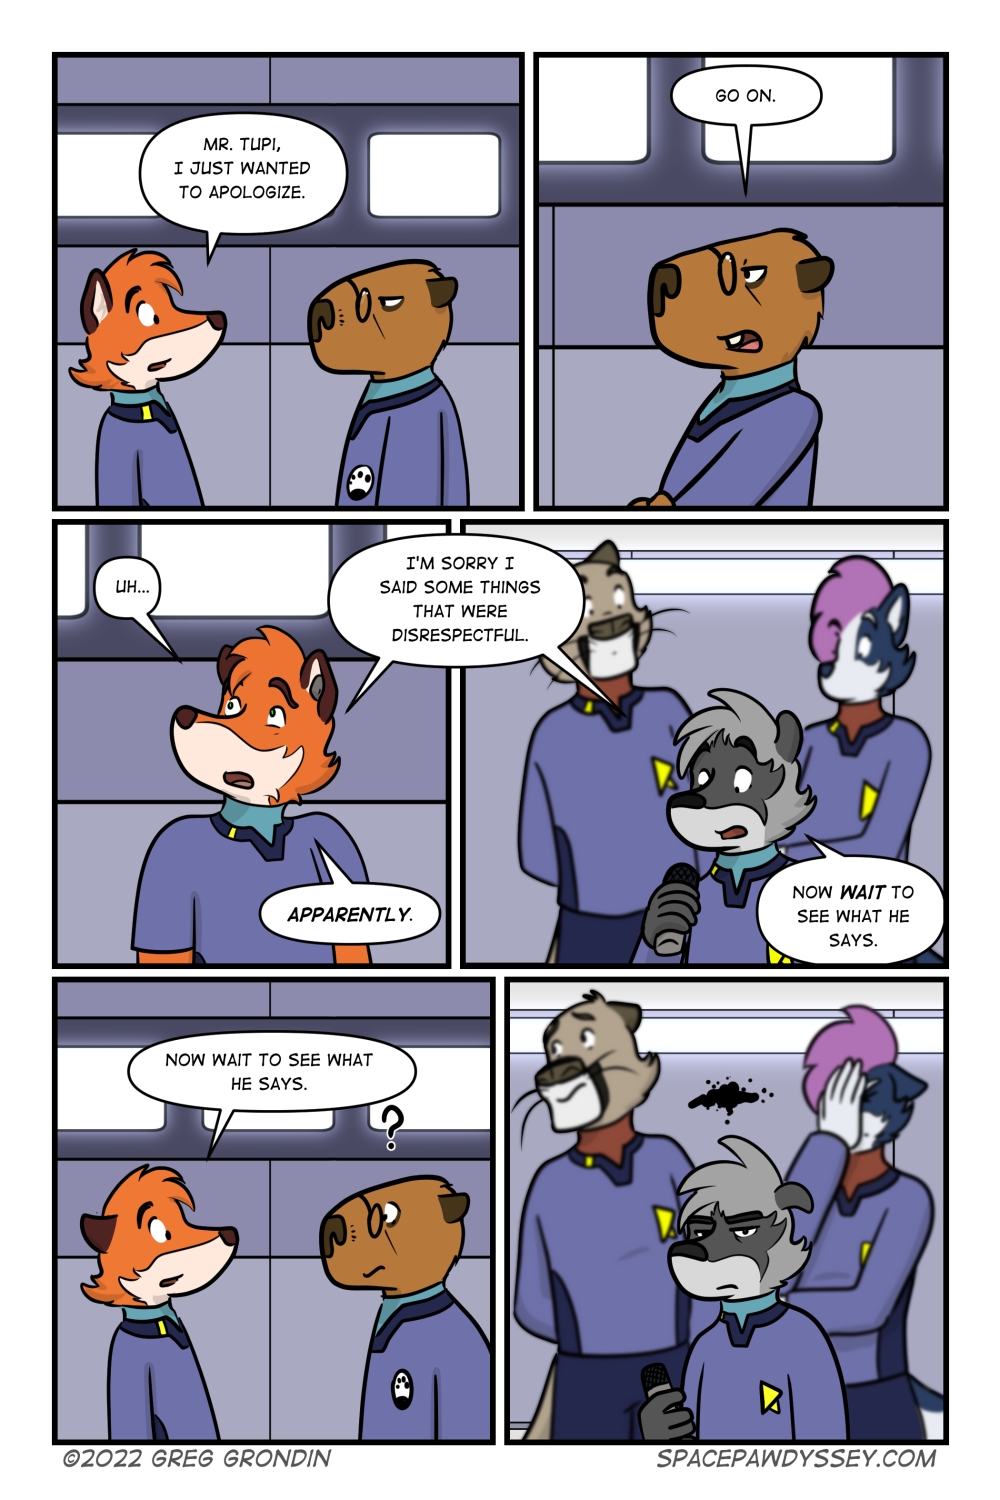 Space Pawdyssey #548